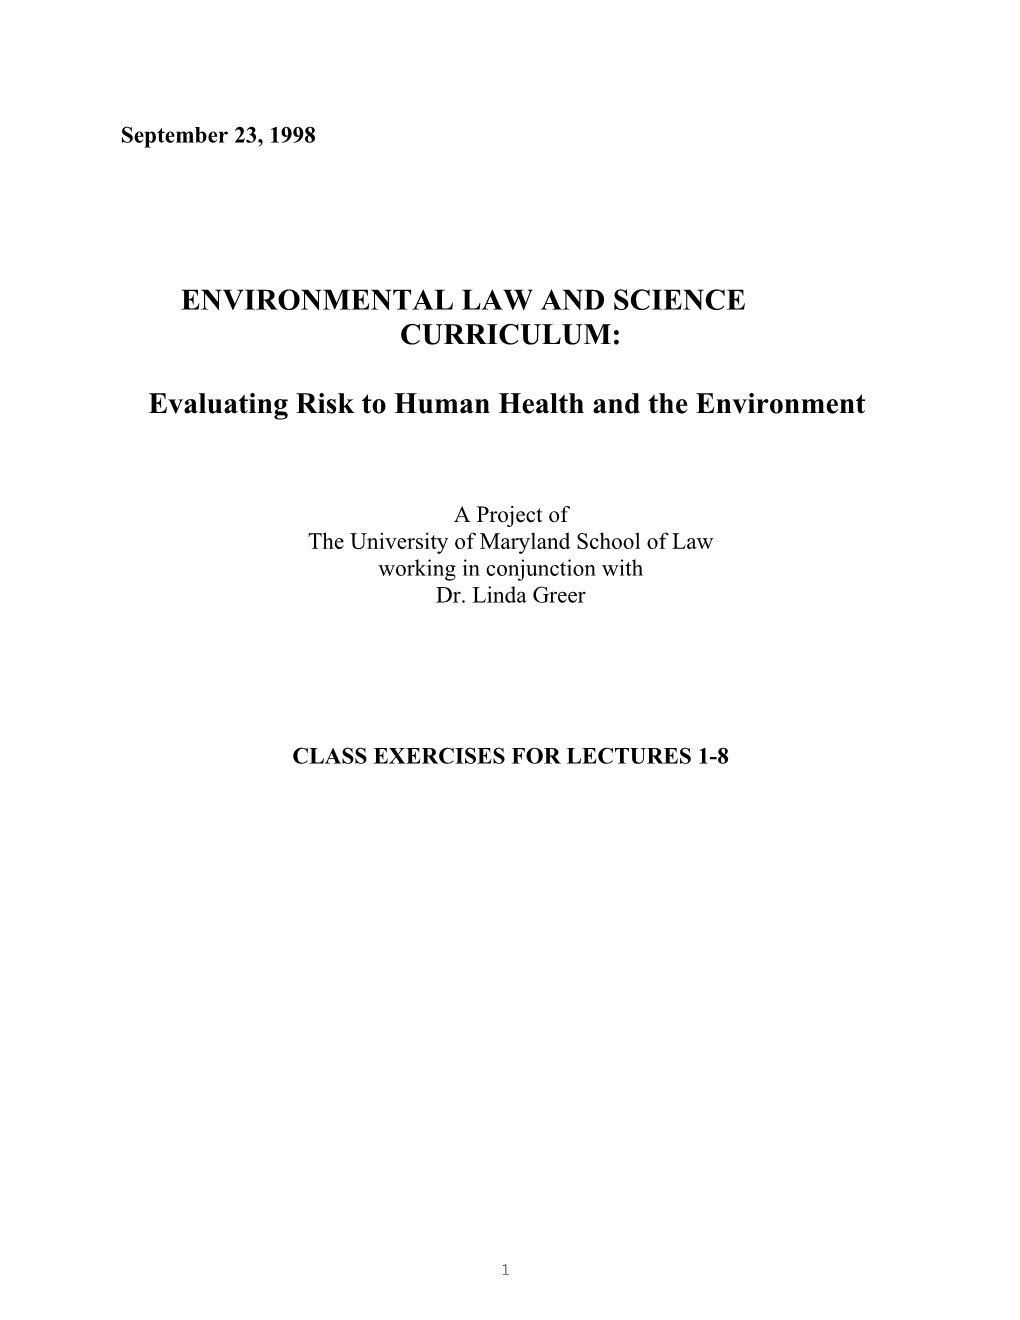 Evaluating Risk to Human Health and the Environment